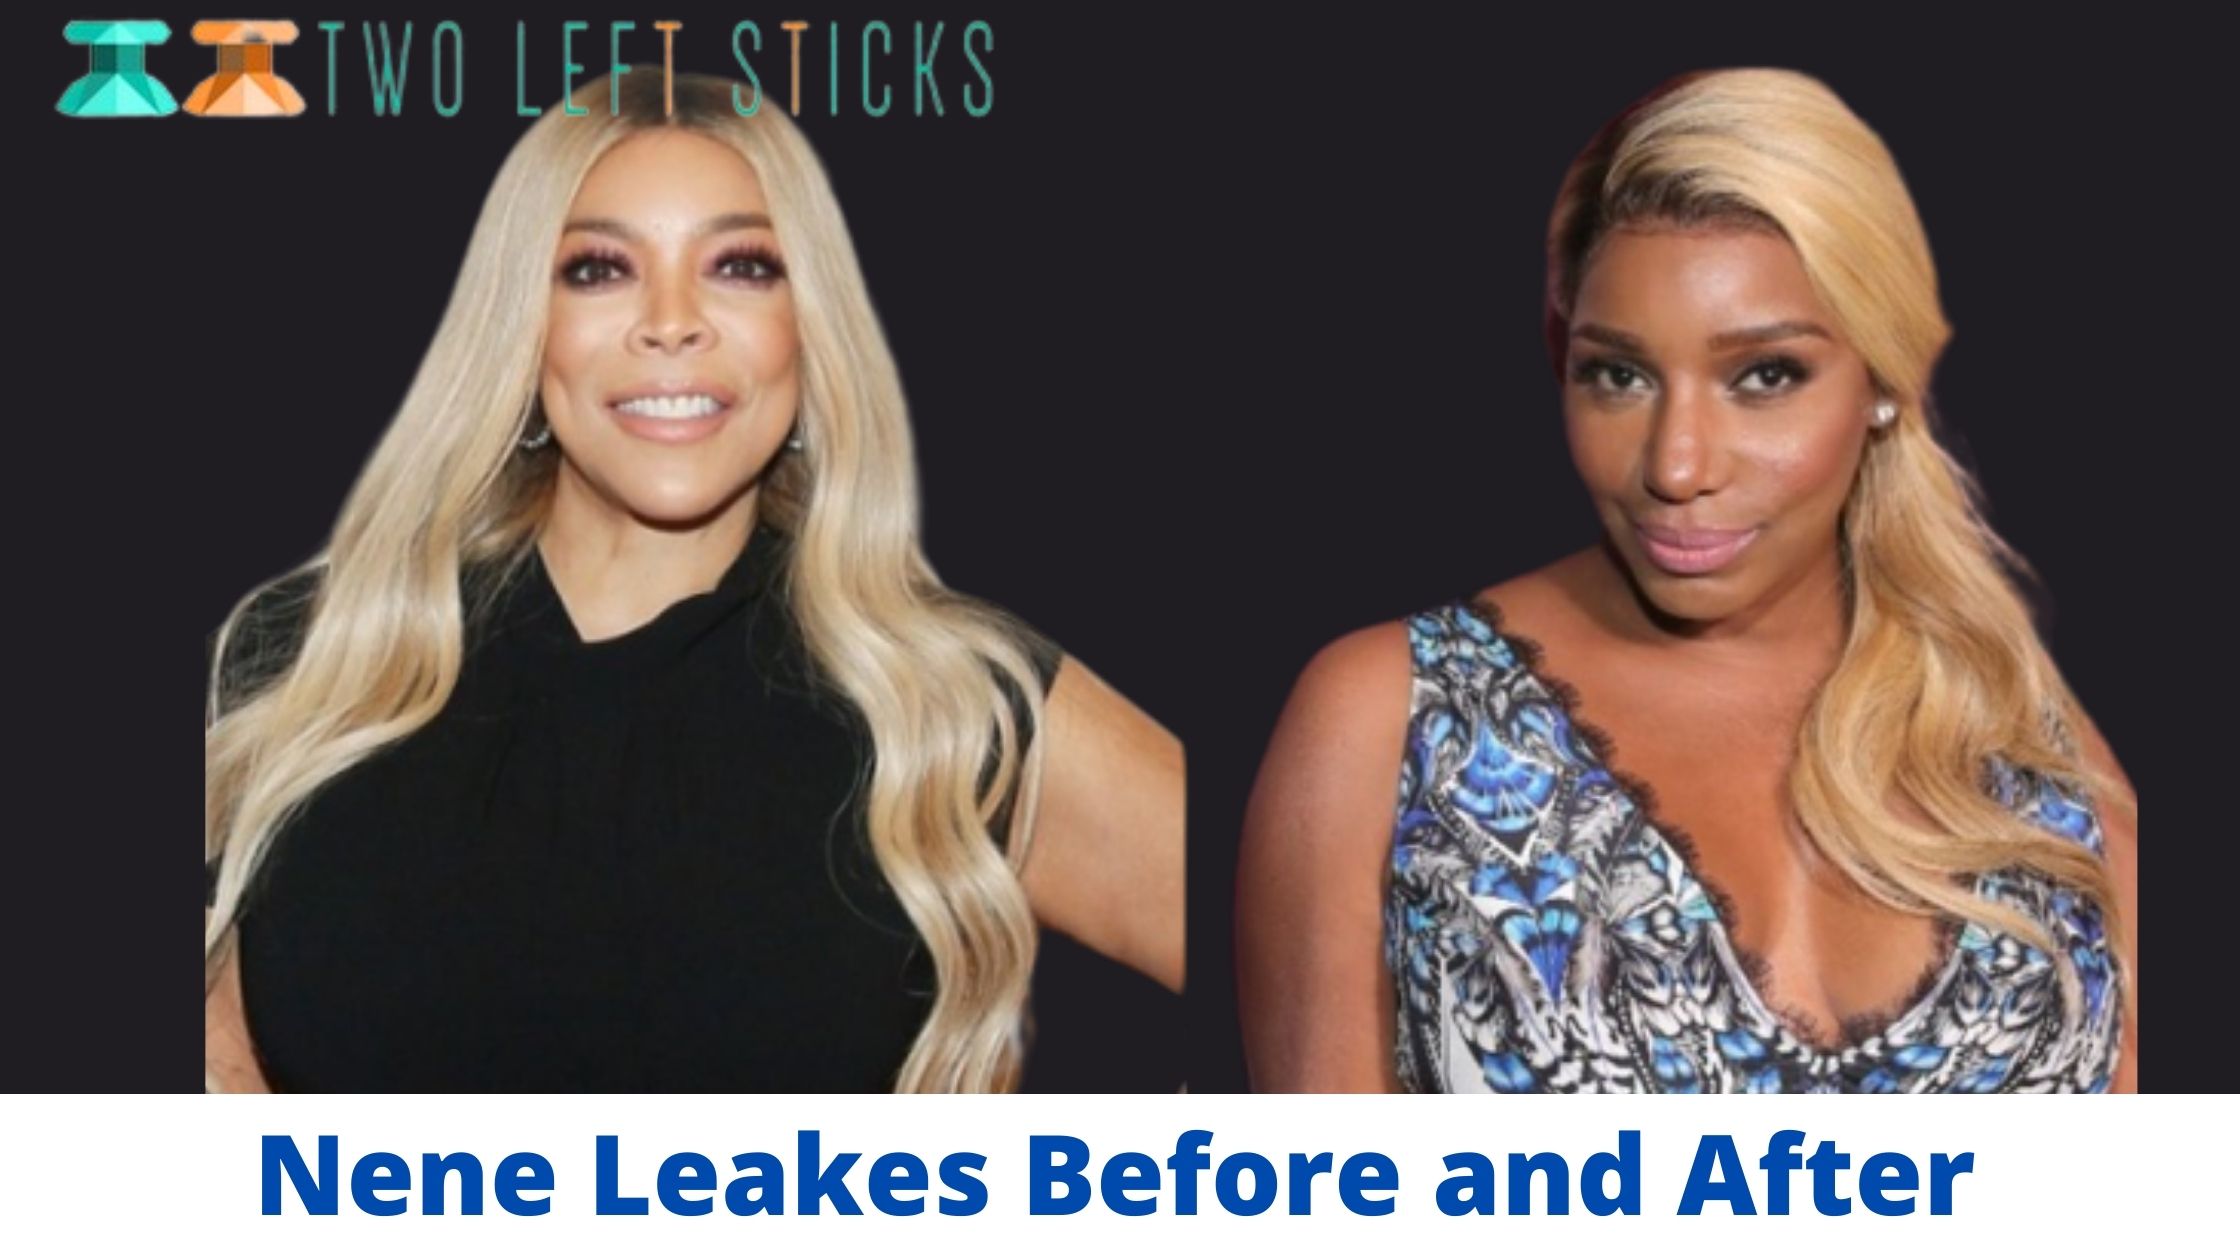 Nene Leakes Before and After- Is She Still Interested in Having Plastic Surgery?